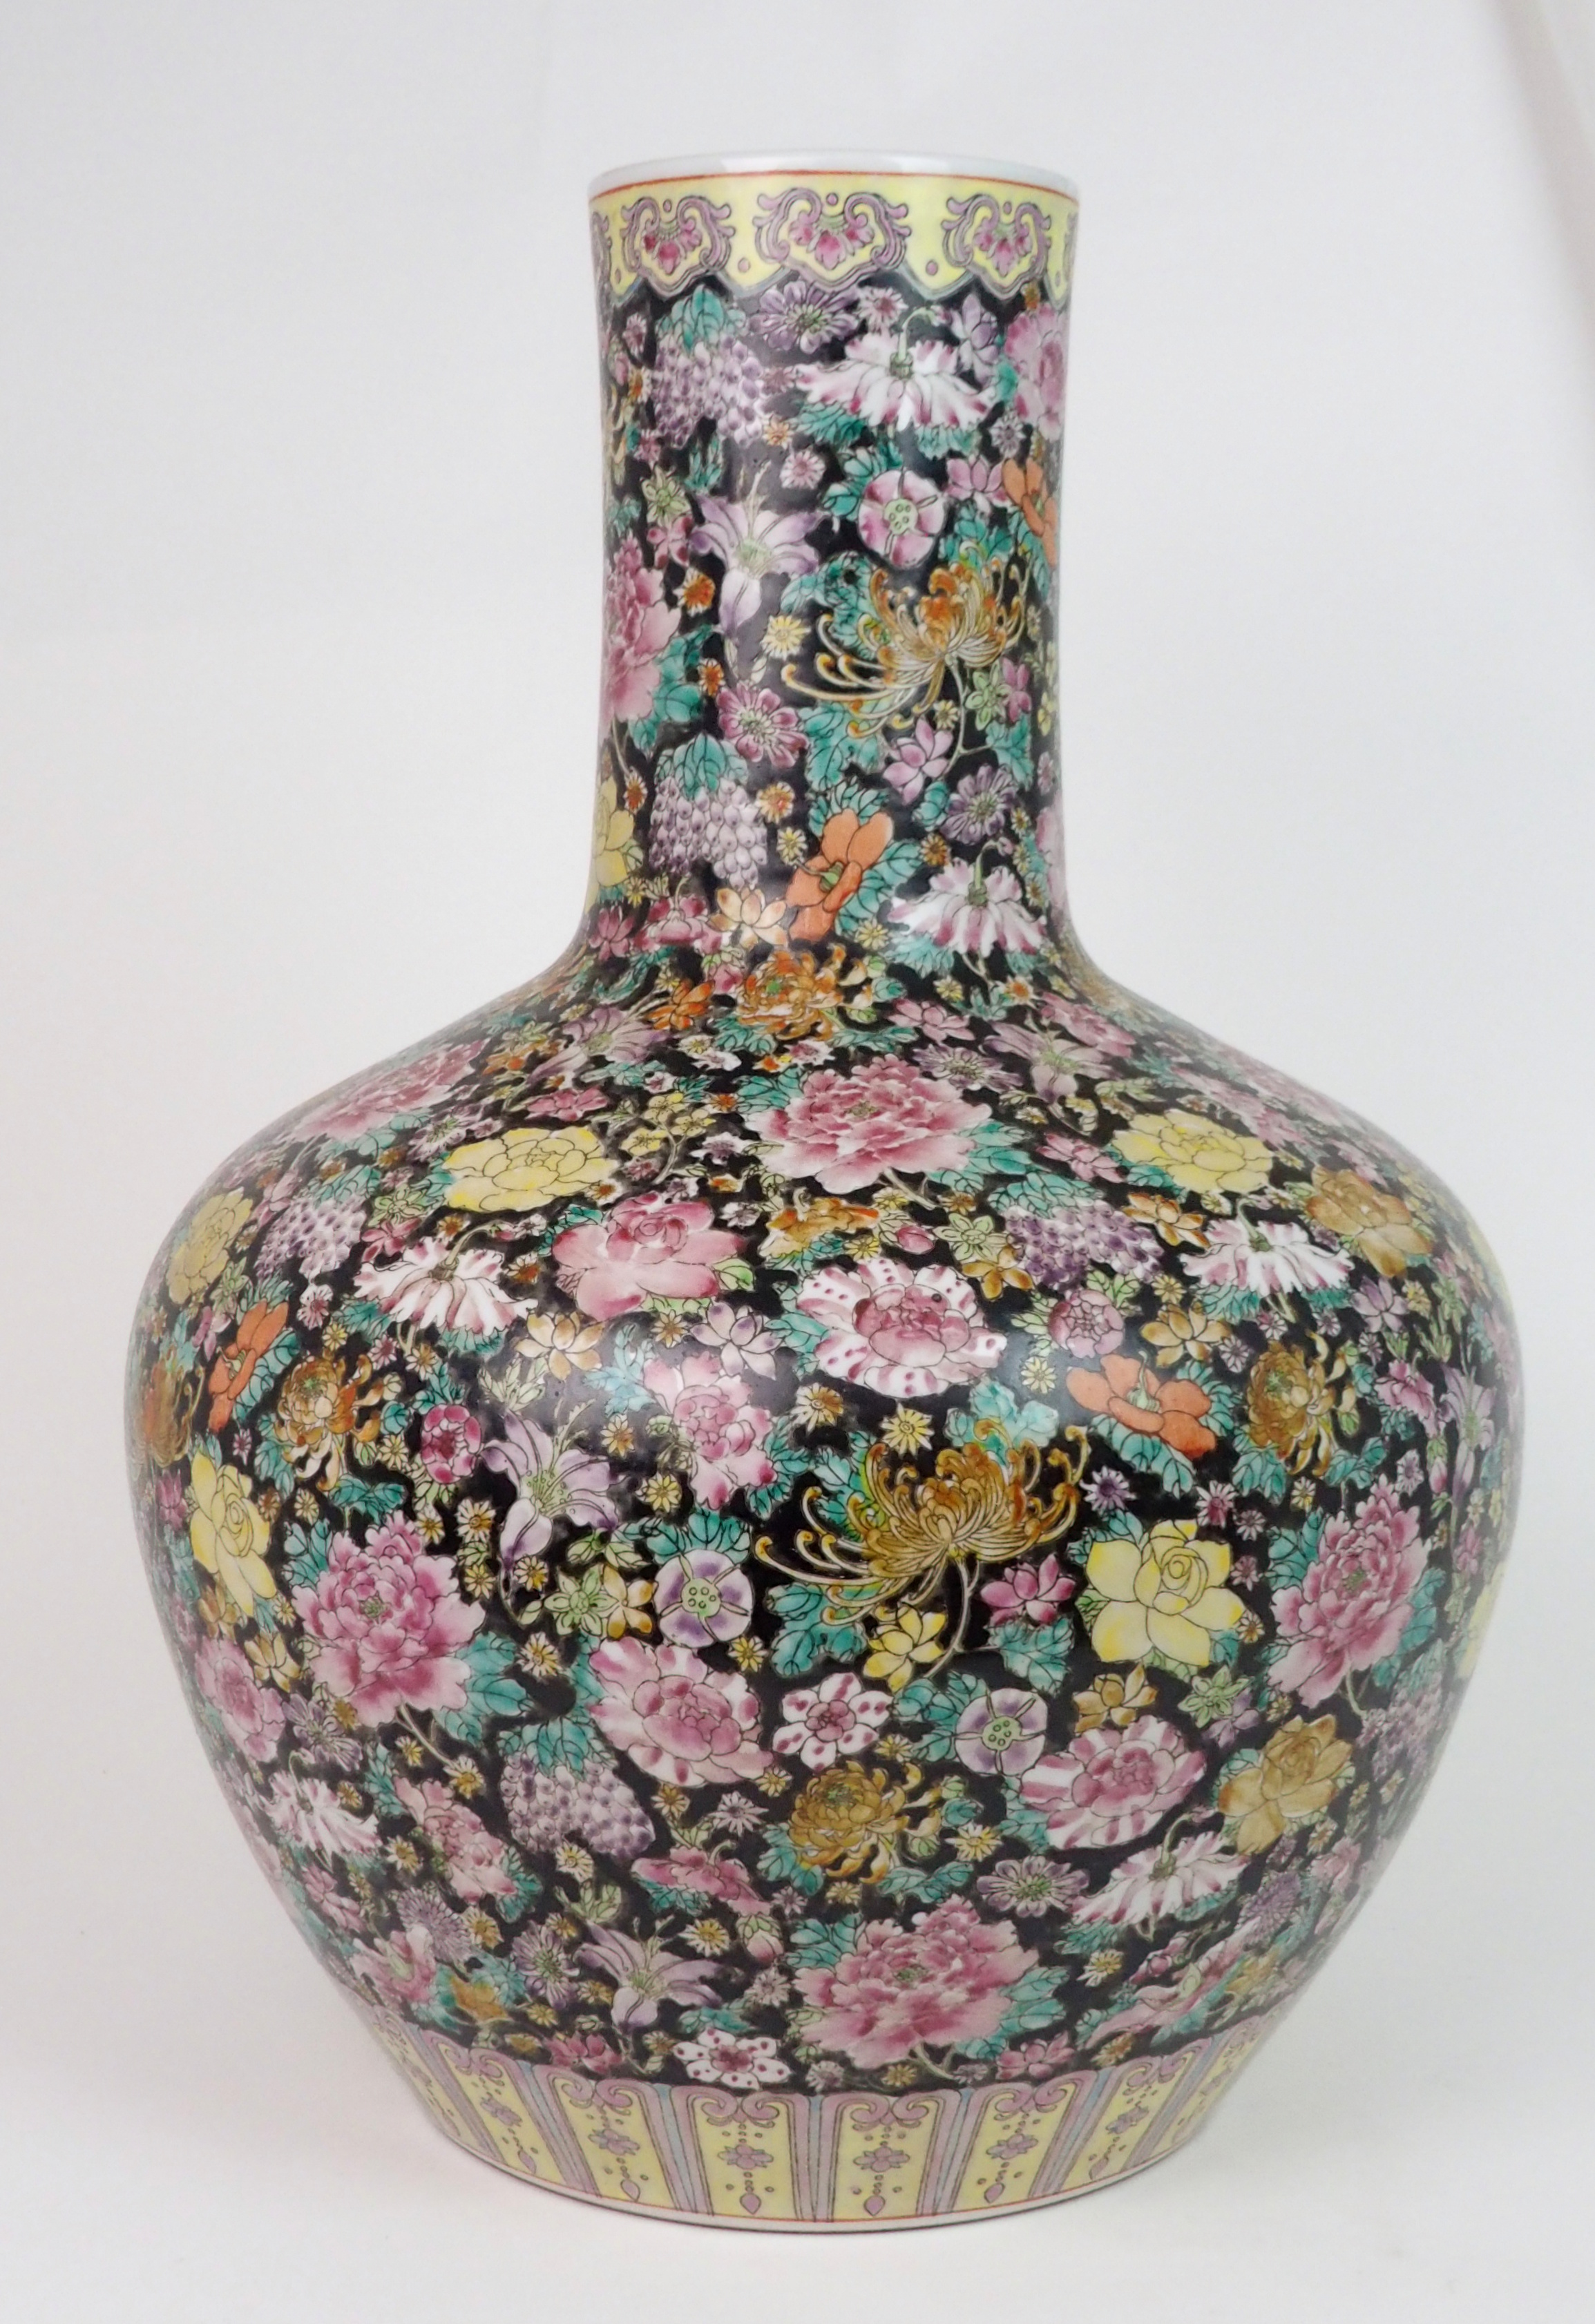 A LARGE CANTON MILLIEFIORI PATTERN BALUSTER VASE painted with allover floral design, within yellow